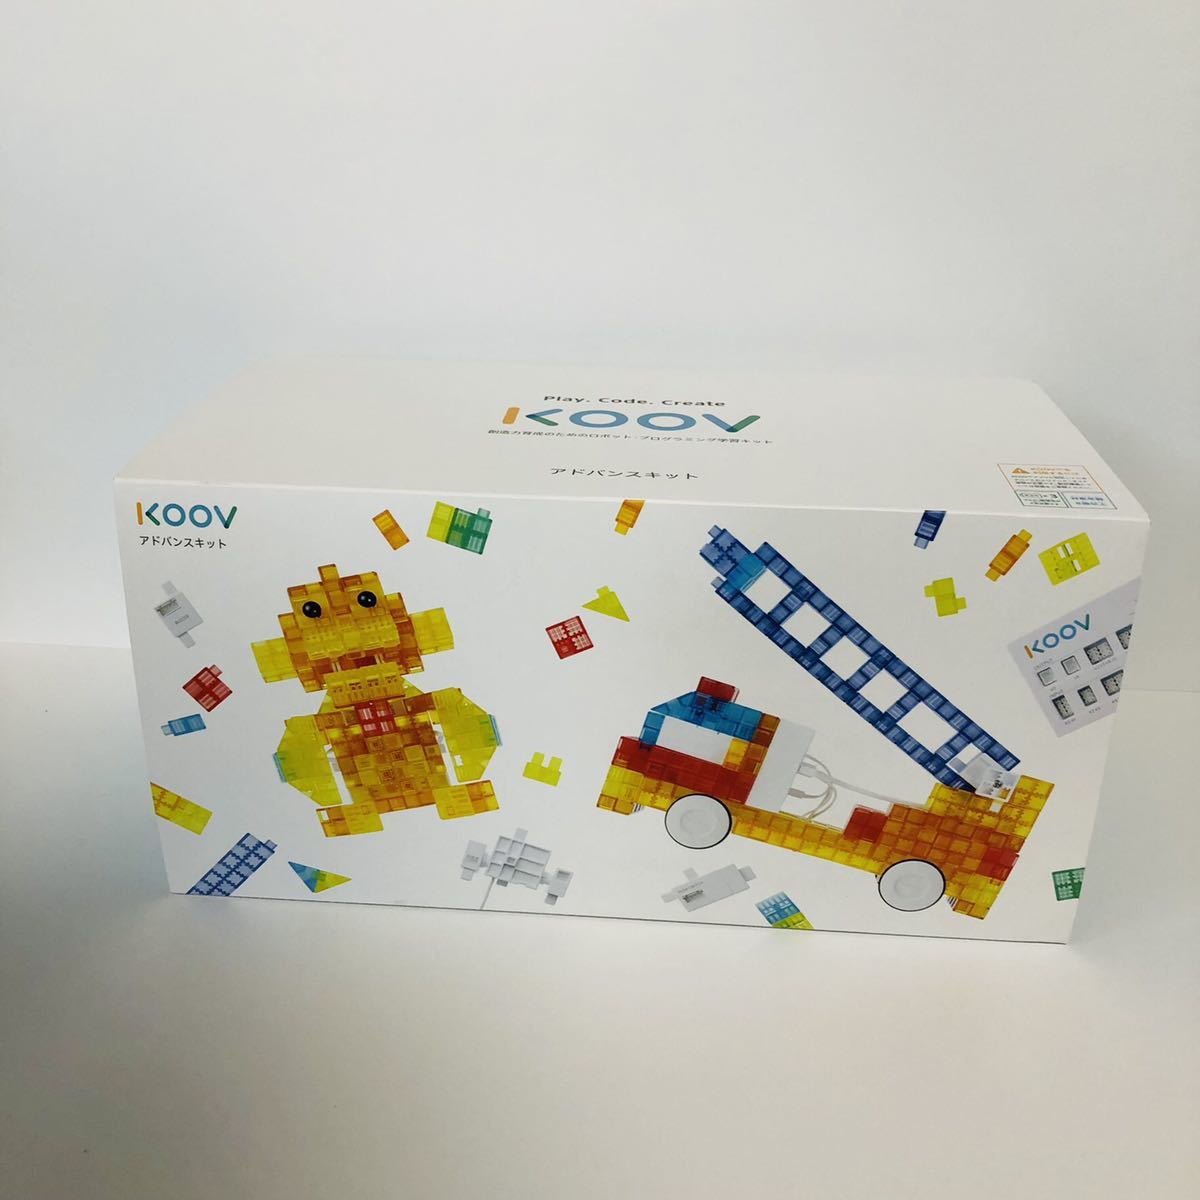 SONY KOOV アドバンス ロボット・プログラミング学習キット （クーブ） その他 公式新製品